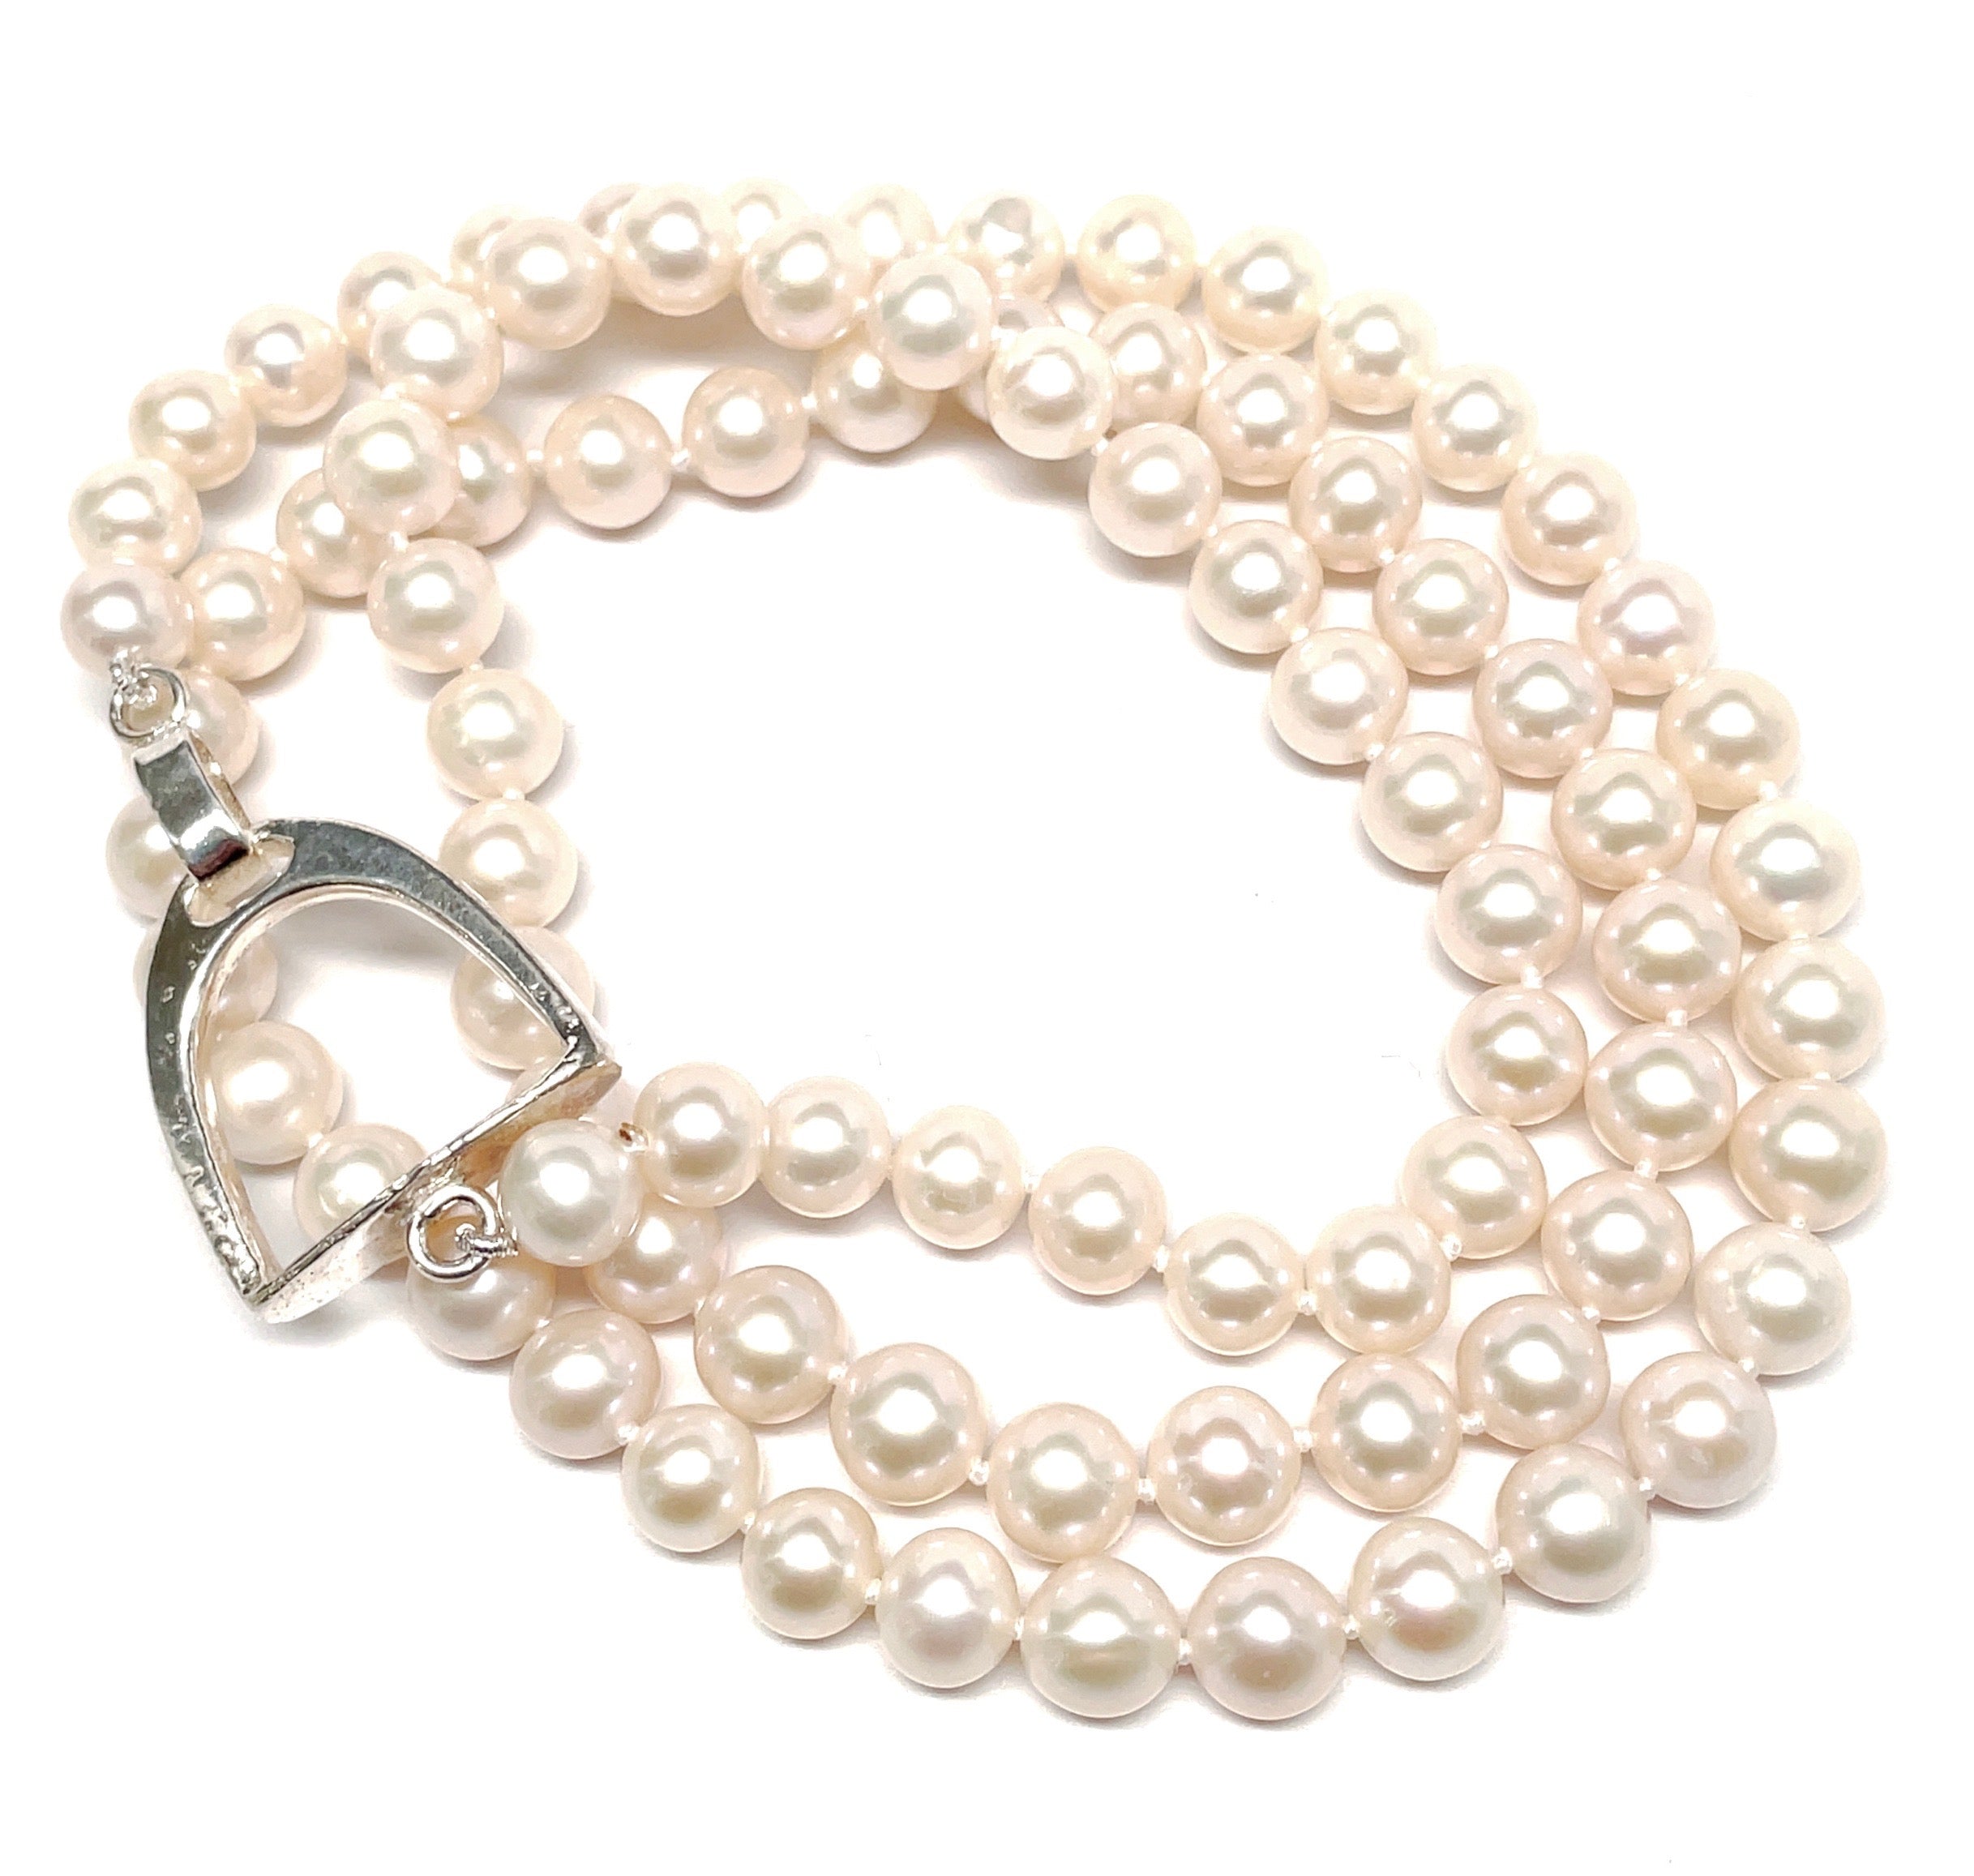 Large stirrup and pearl necklace